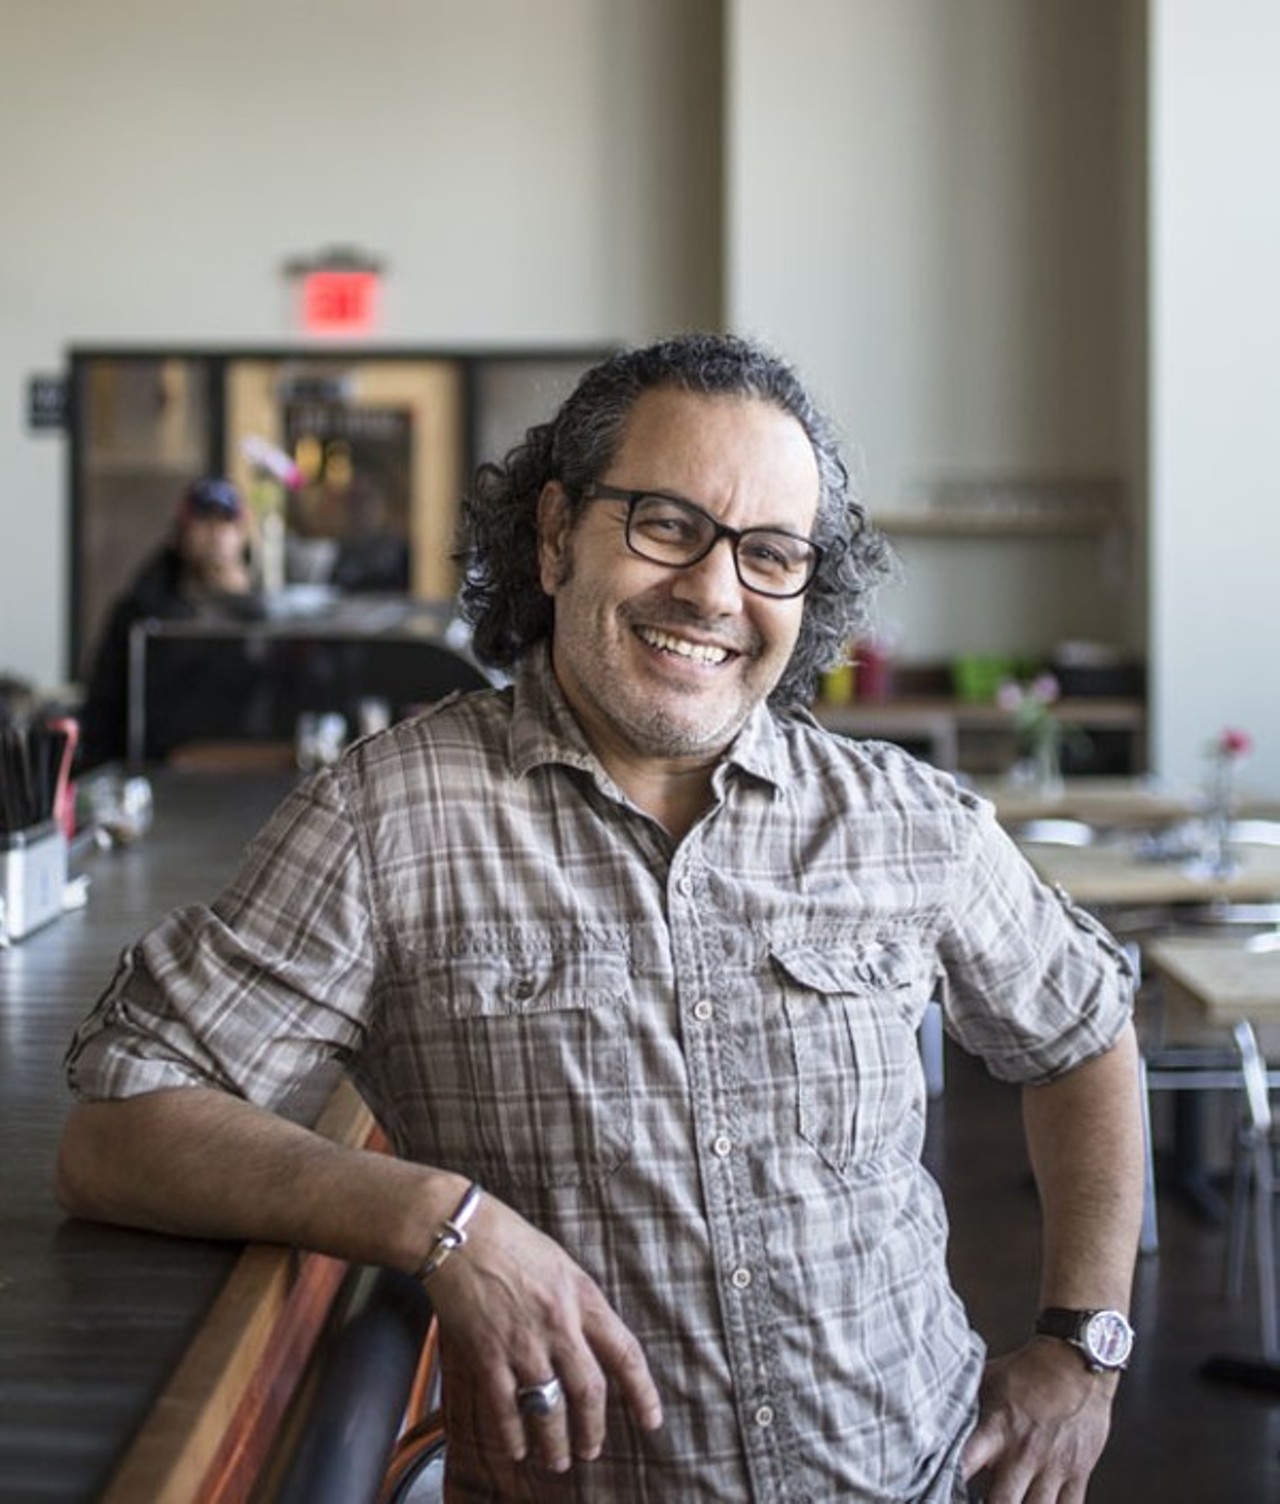 Jeliti was previously a mathematics professor. His path toward the restaurant industry, and eventually Spare No Rib, began through his part-time job at Bar Italia while studying at Washington University. Now, he also owns Egg, a breakfast spot born out of a pop-up he held at Spare No Rib on Sundays. Photo by Jennifer Silverberg.